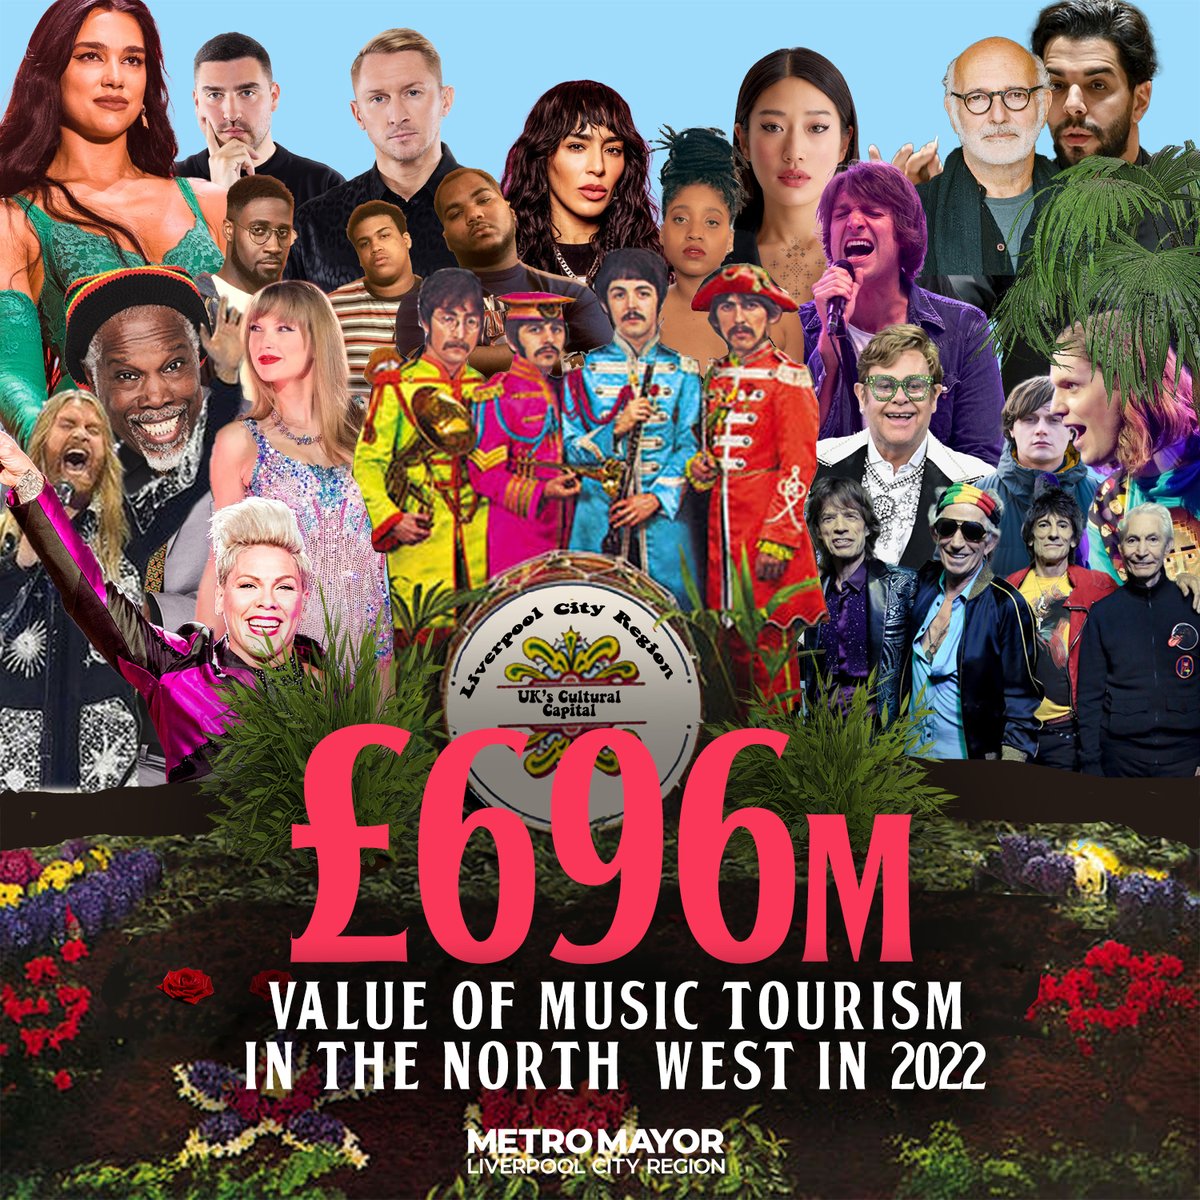 🎤 WITH A LITTLE HELP FROM OUR FRIENDS 🎤 💷 A new @UK_Music report has estimated that music tourism boosted the North West economy by £696m last year, attracting more than 1.9 million people to the region. 💁‍♀️There's a reason we're known as UK's Cultural Capital.